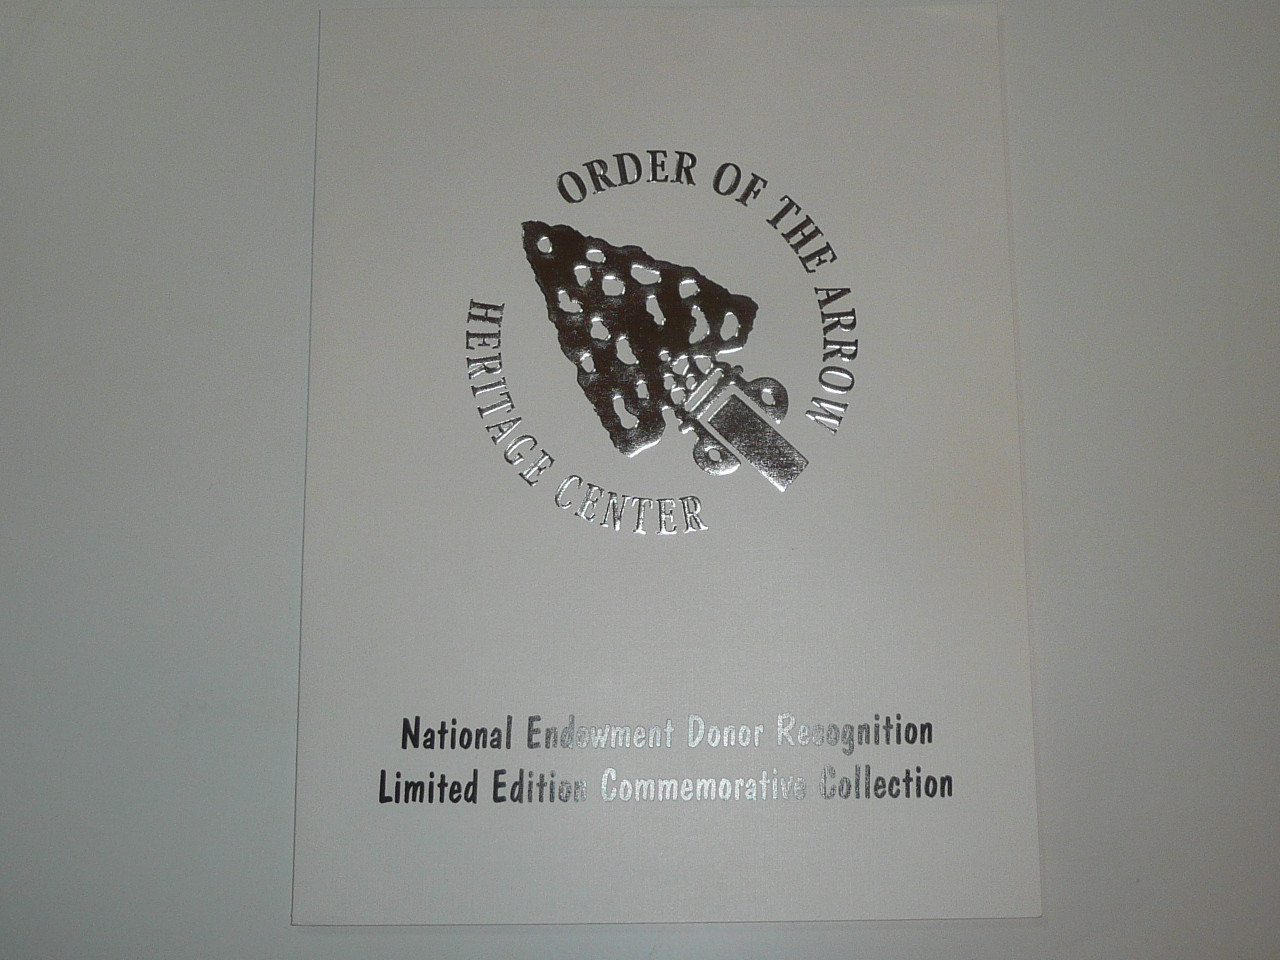 National Order of the Arrow Conference (NOAC), 2004 National Endowment Donor Recognition Limited Edition Commemorative Collection